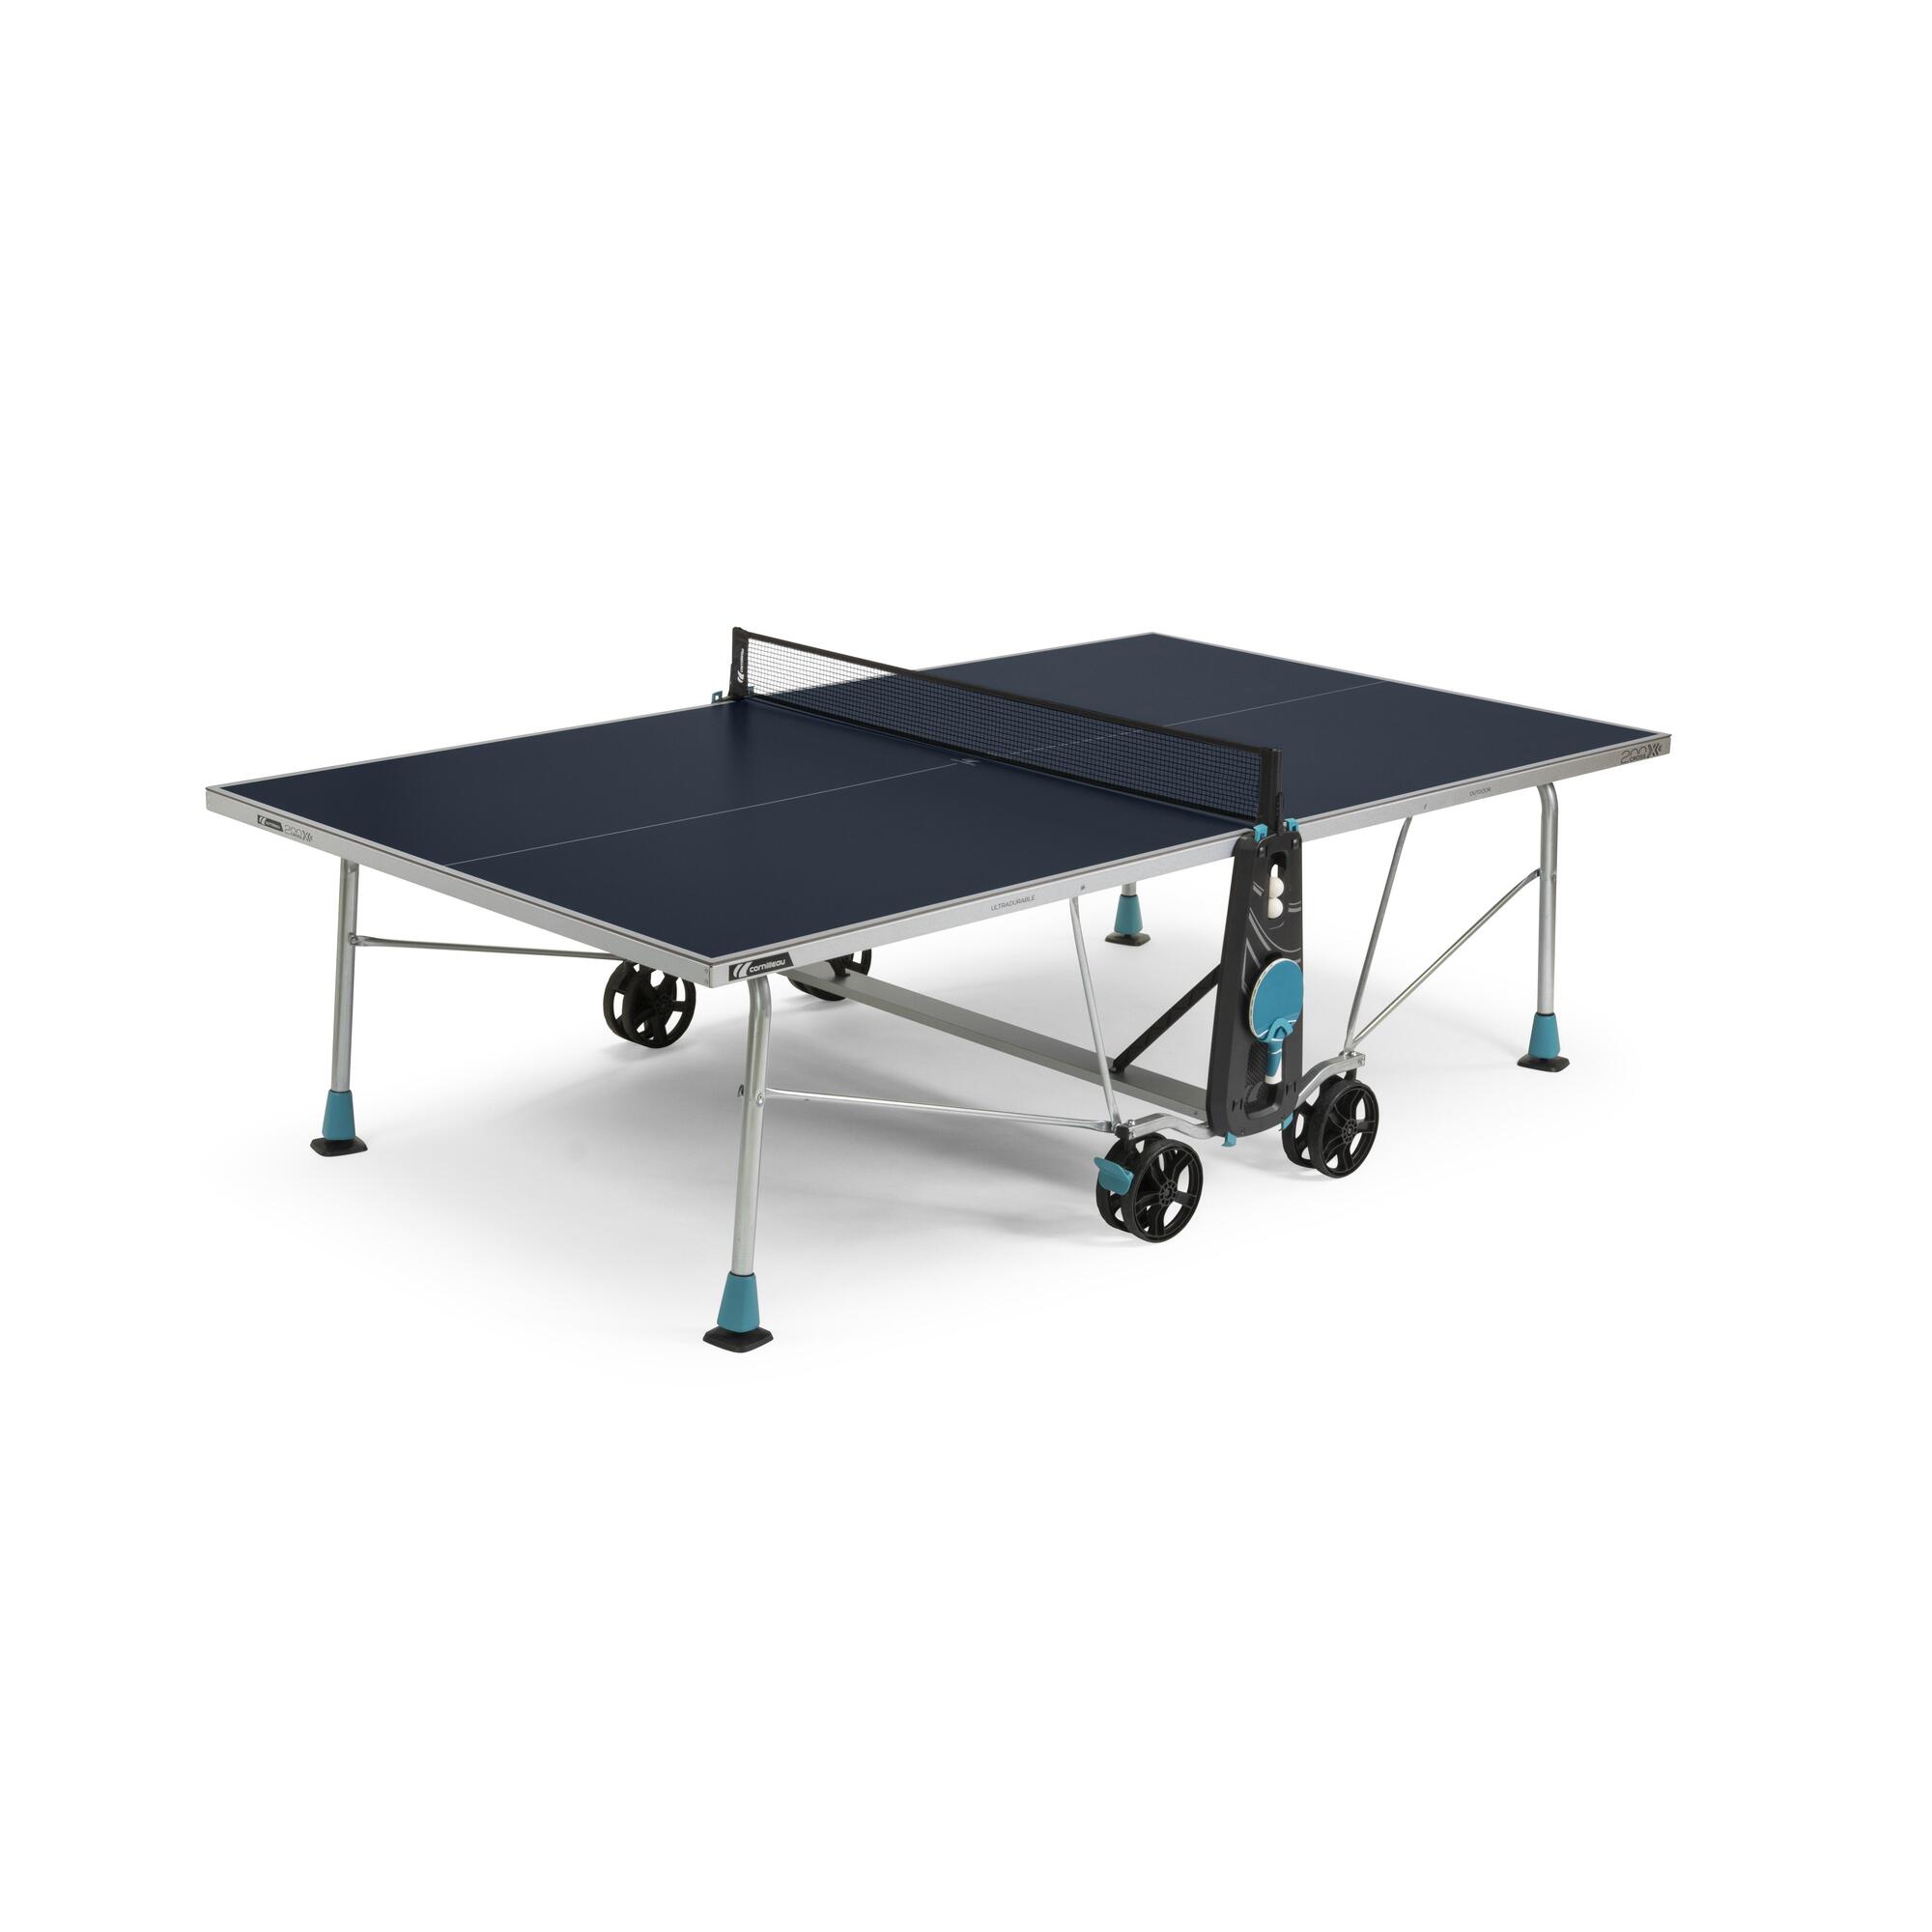 ping pong tables